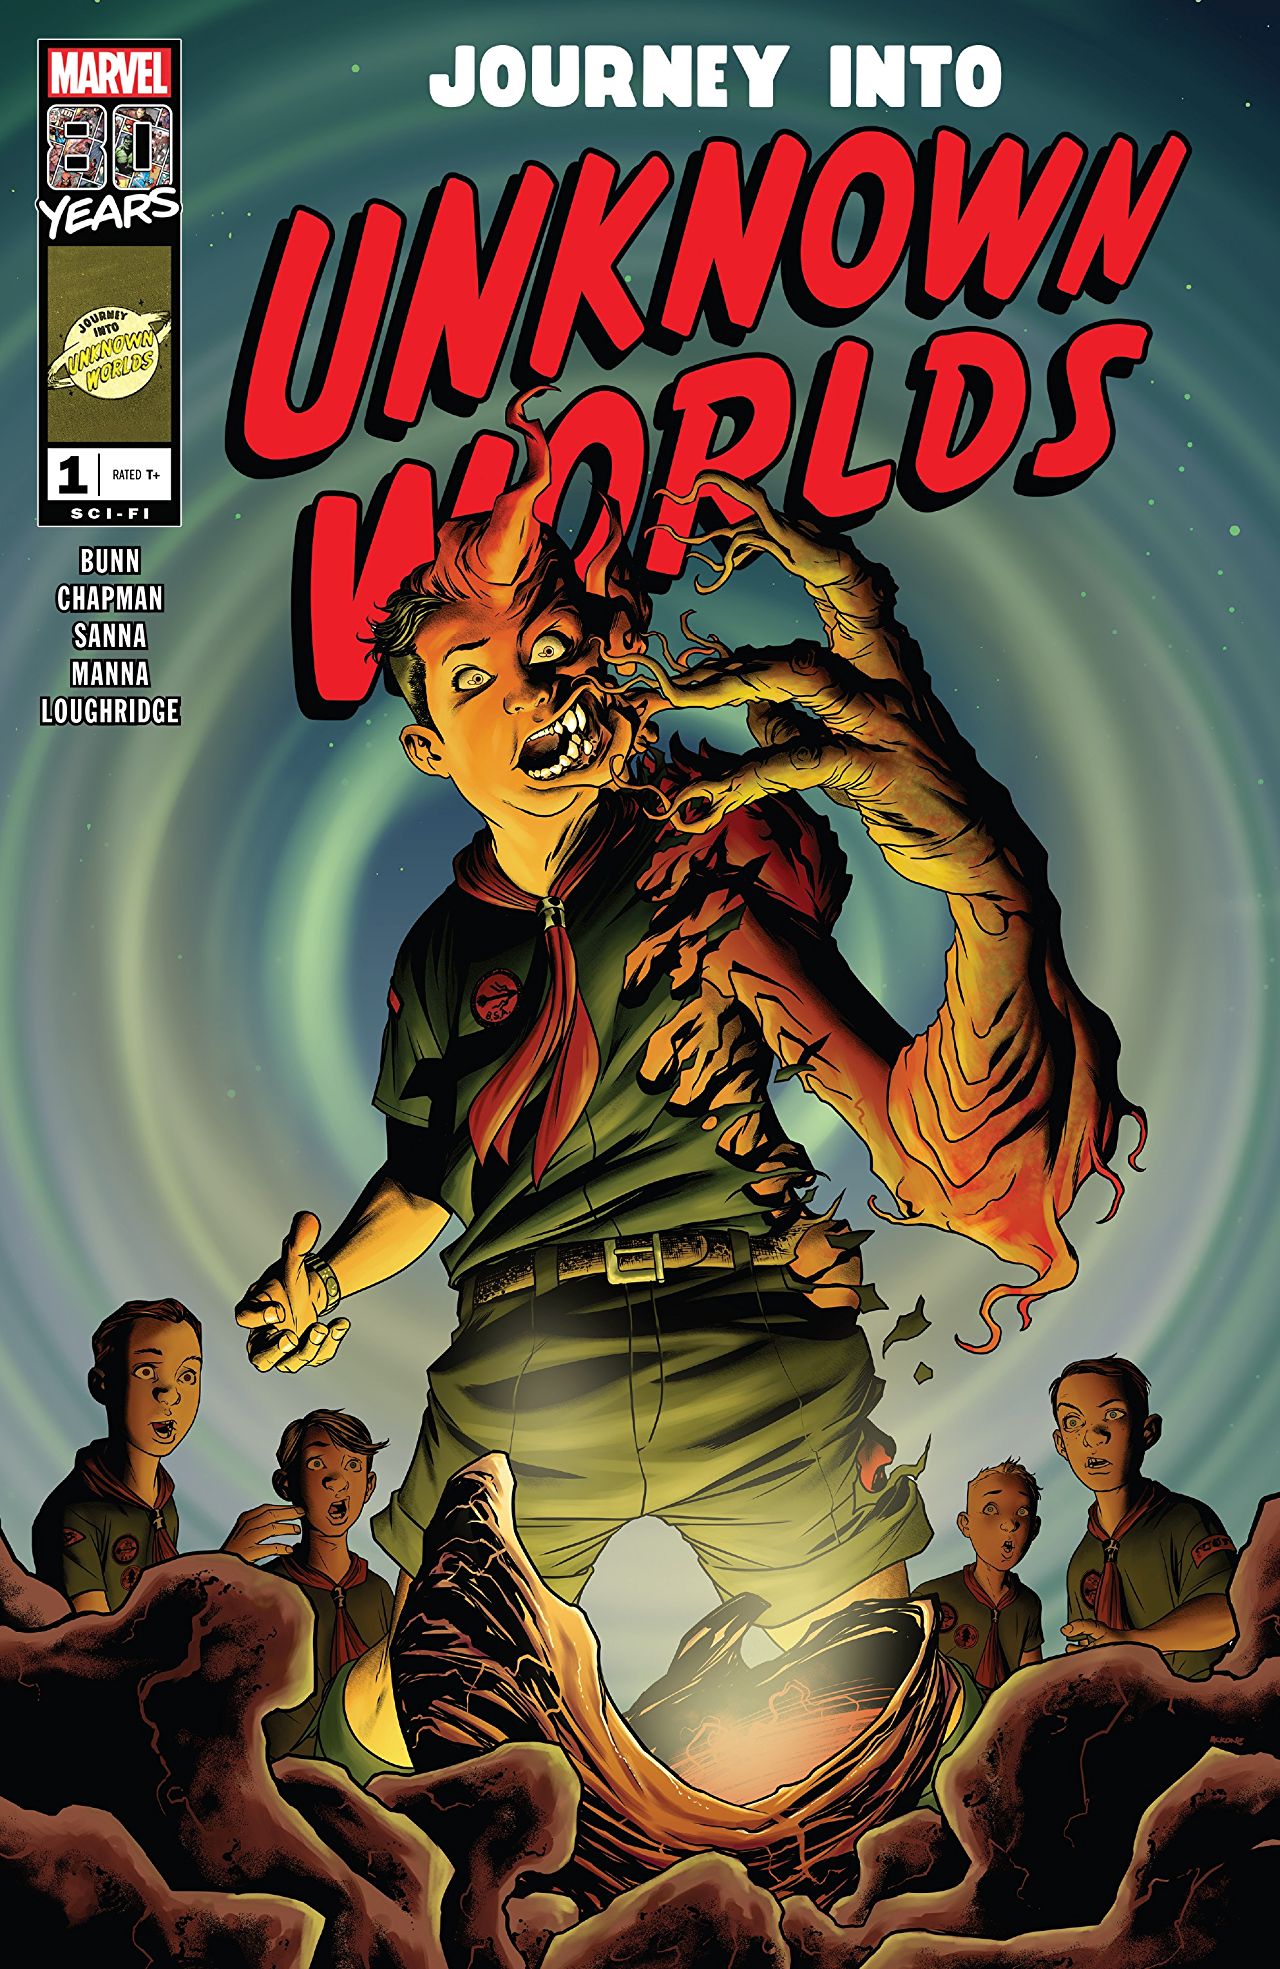 Marvel Preview: Journey into Unknown Worlds #1